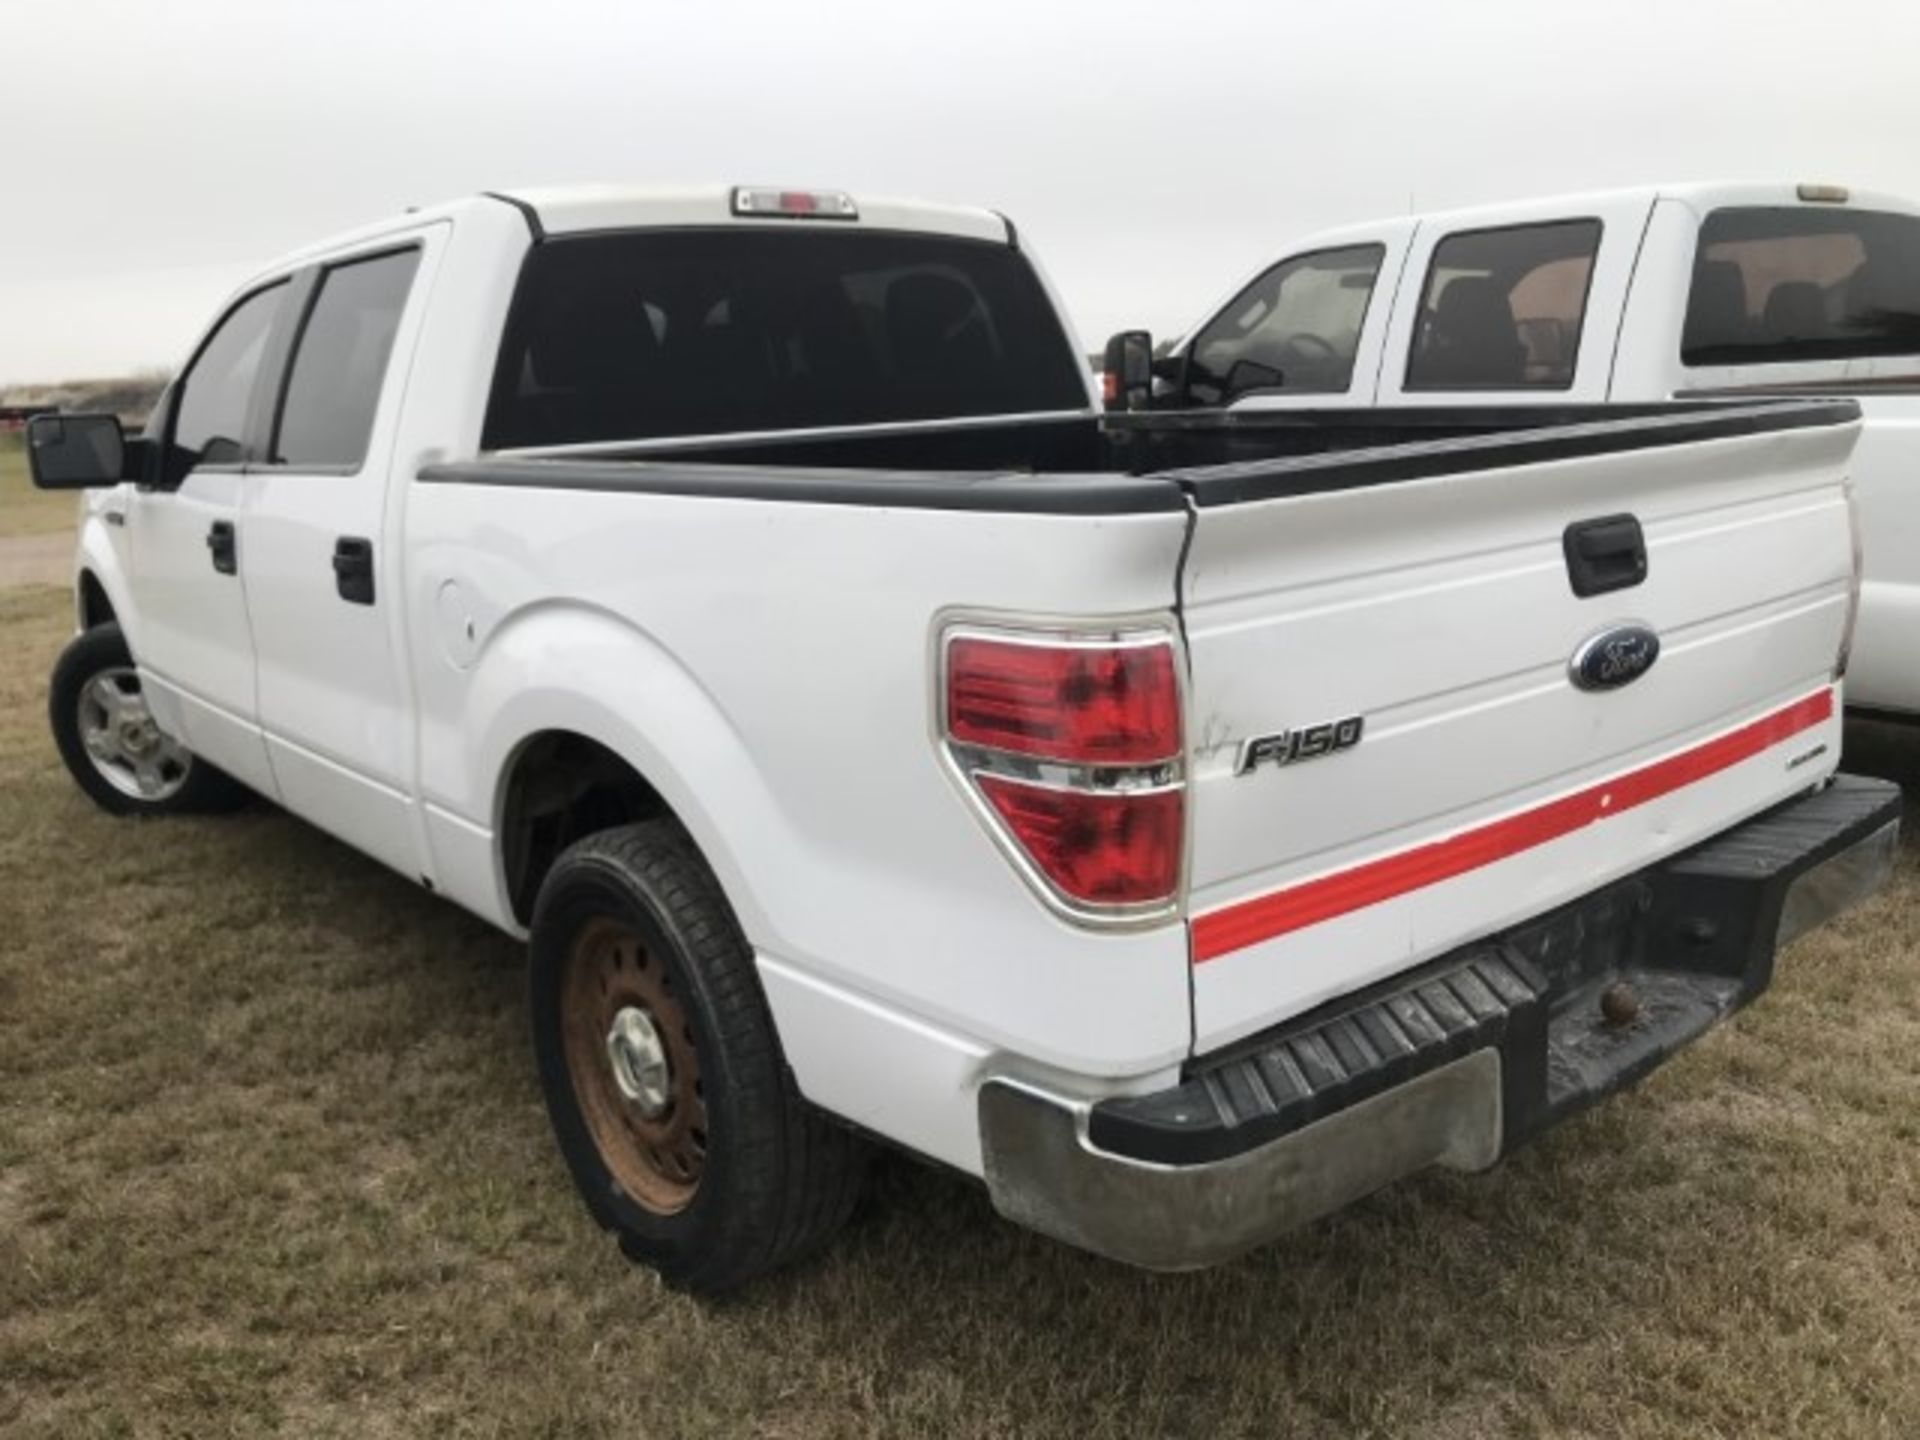 2014 Ford F-150 XLT VIN: 1FTFW1CF3EKD92983 Odometer States: 51,685 Color: W - Image 4 of 6